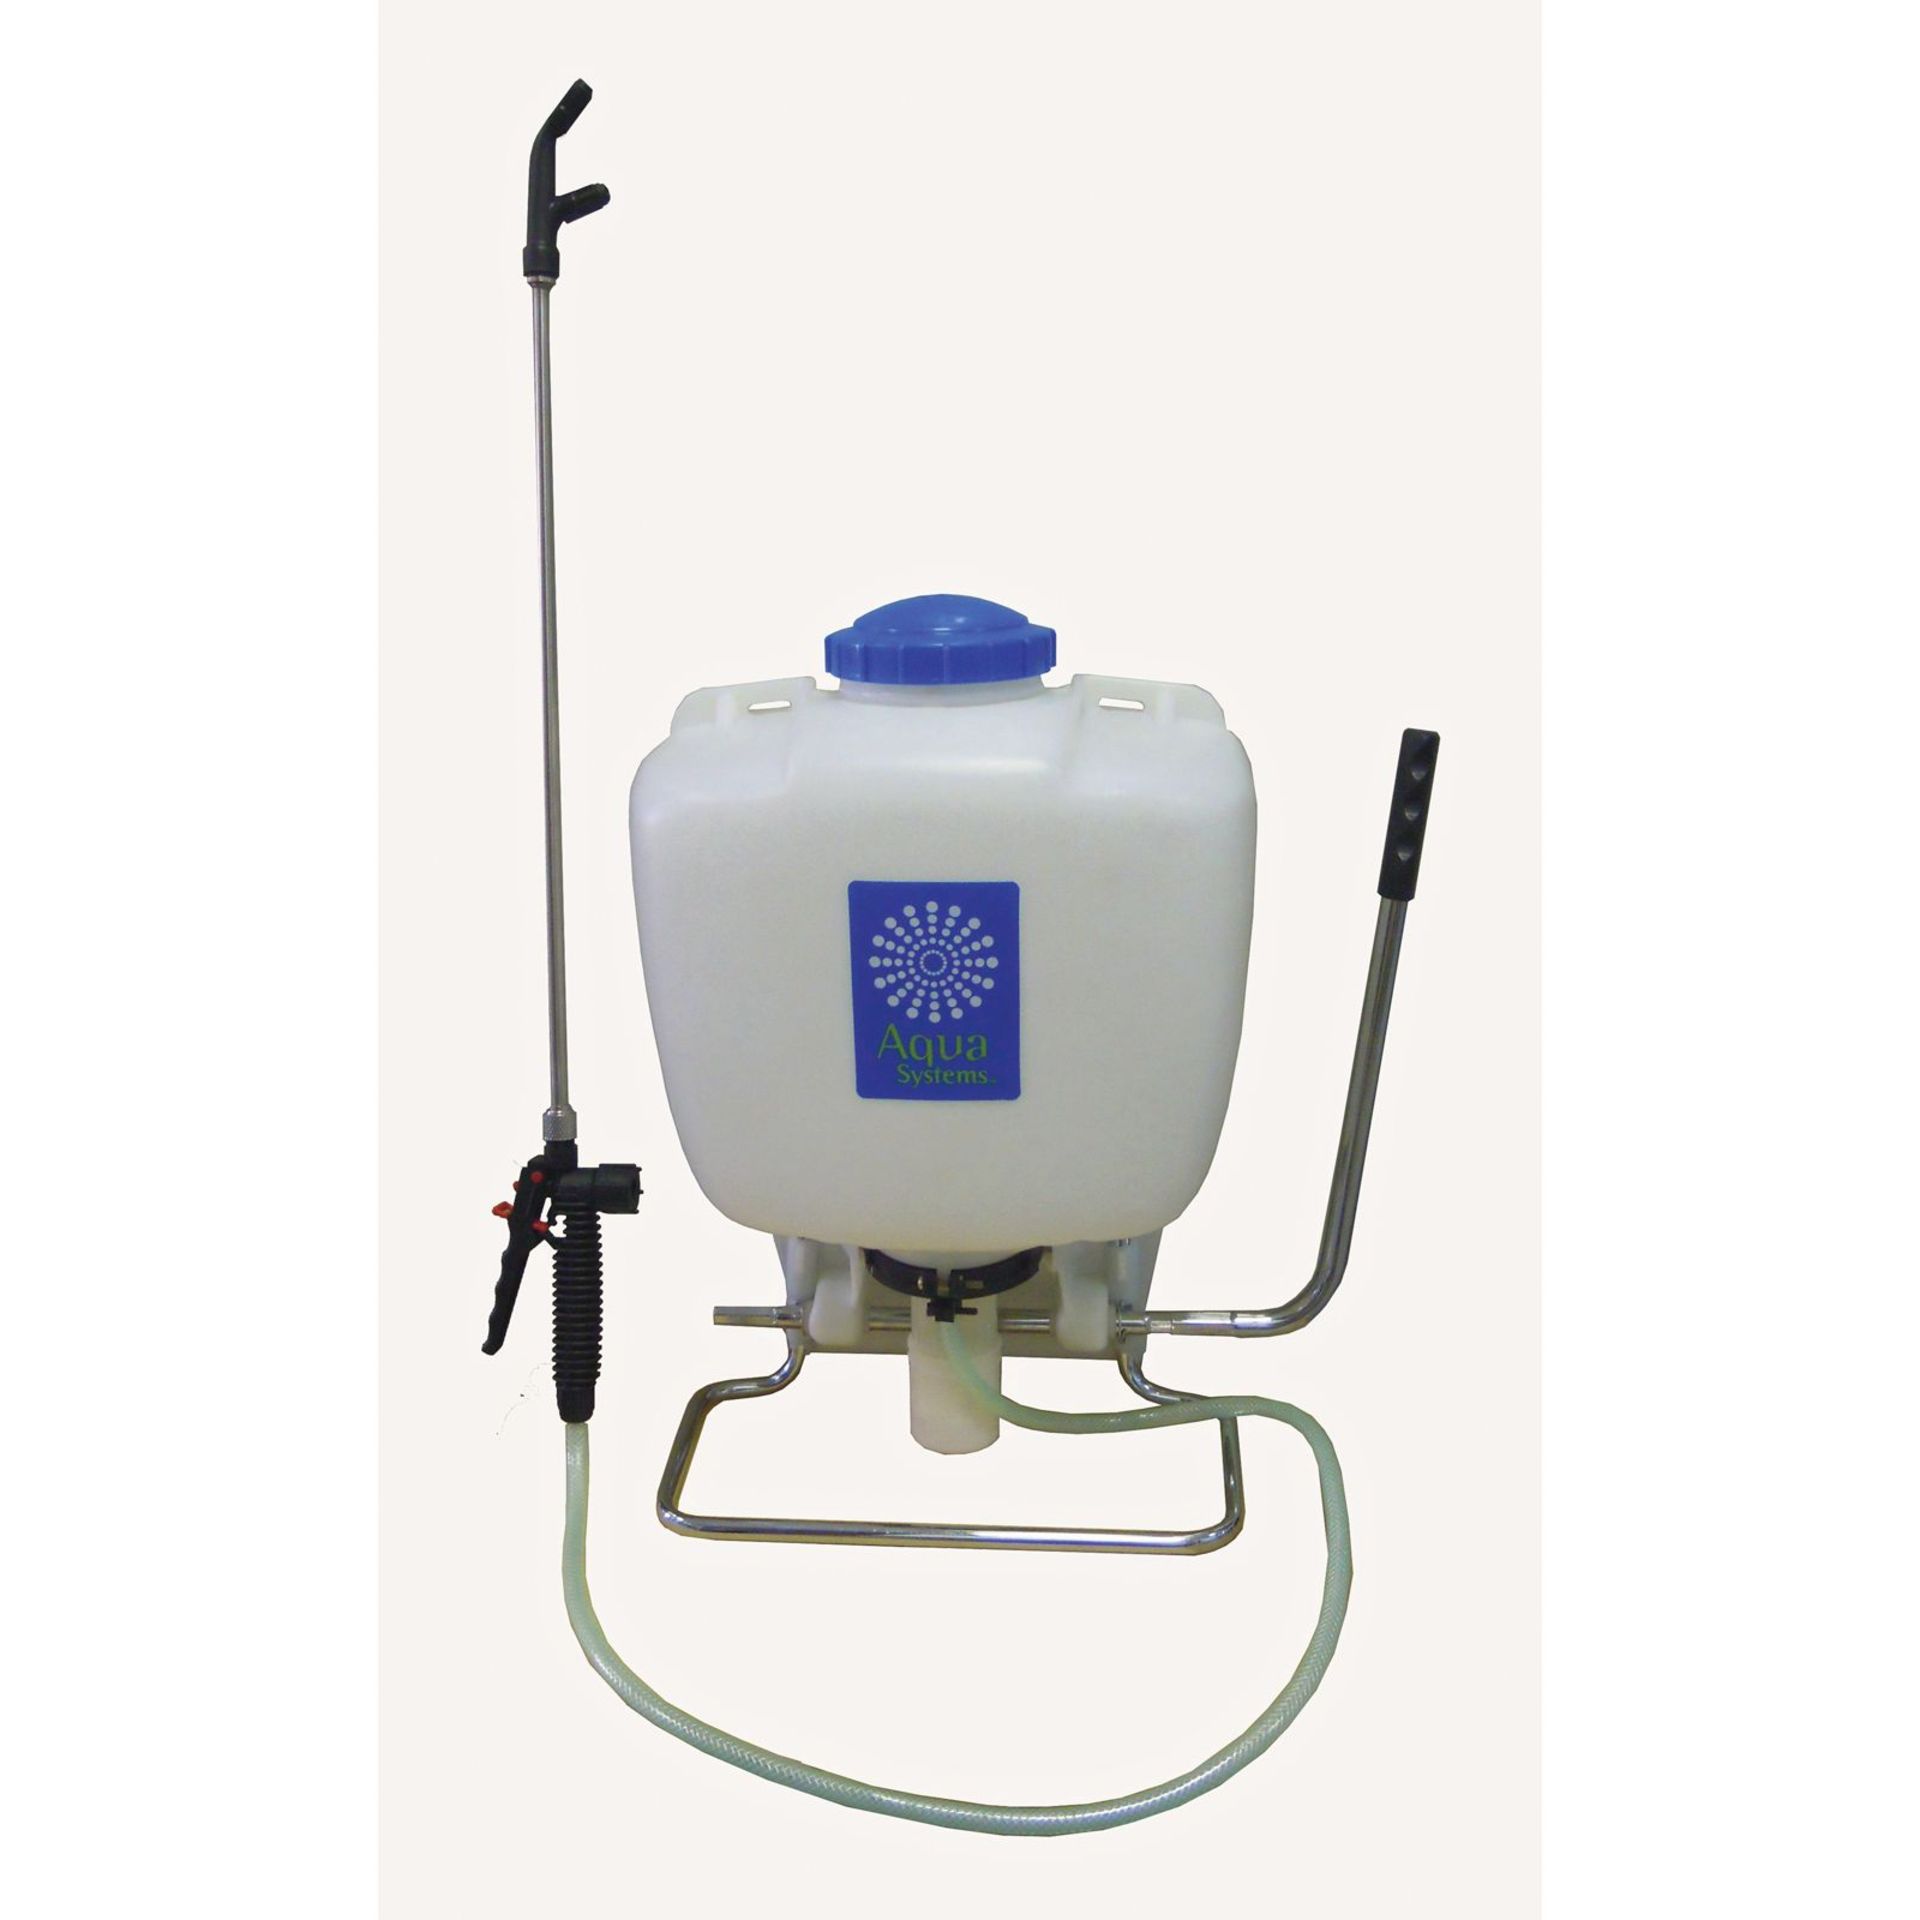 V Brand New Aqua Systems 15L Backpack Pressure Sprayer - Stainless Steel Lance And Pump Handle